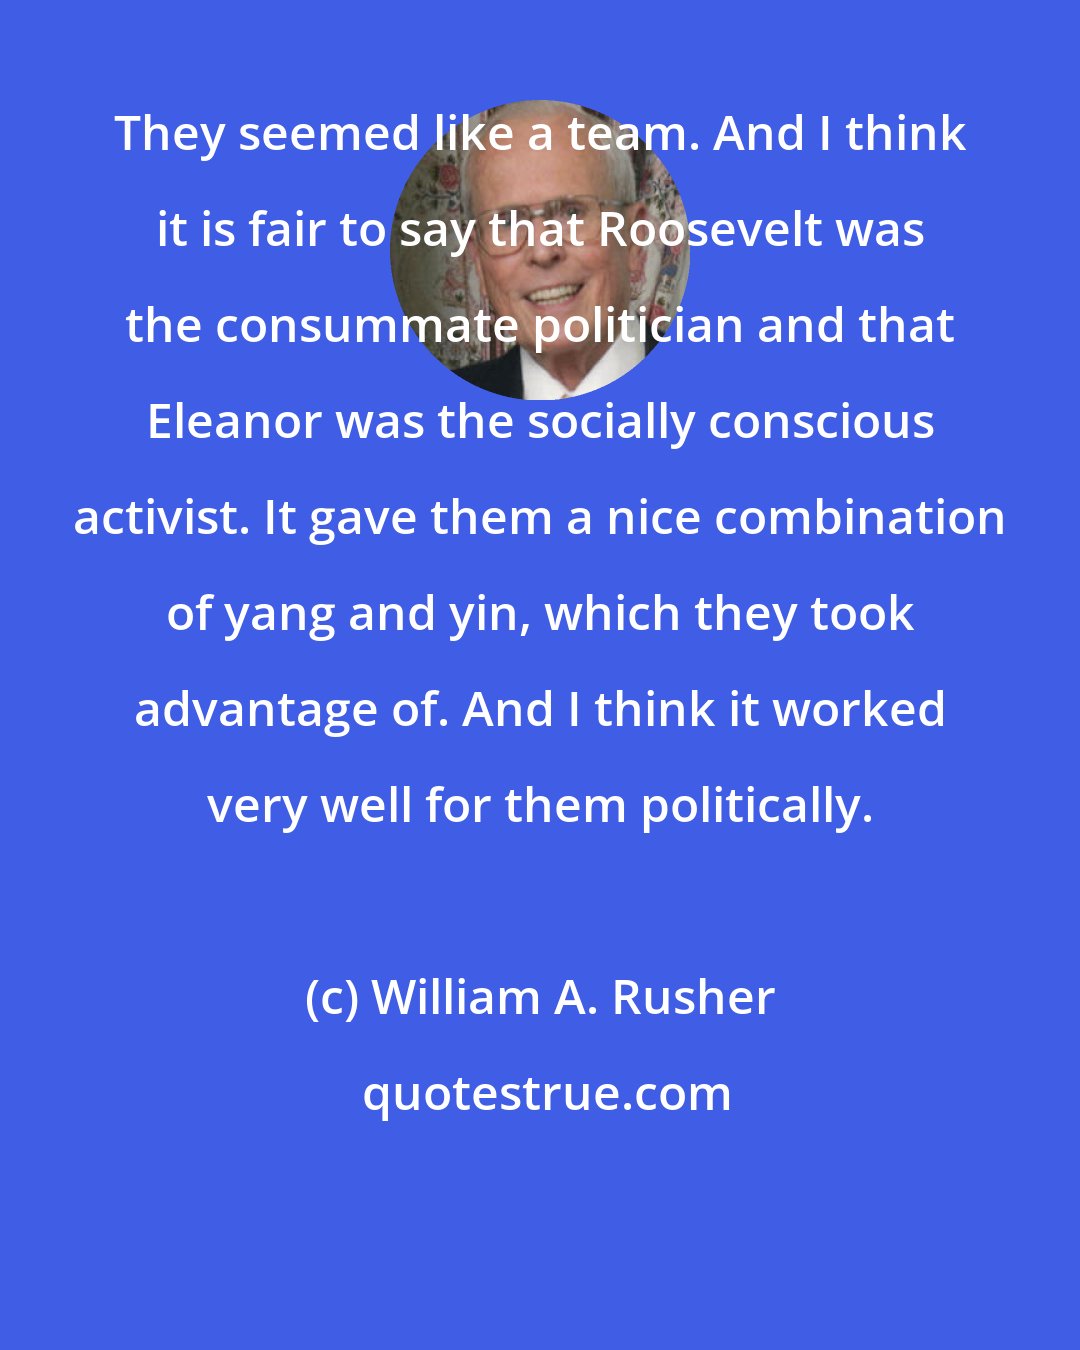 William A. Rusher: They seemed like a team. And I think it is fair to say that Roosevelt was the consummate politician and that Eleanor was the socially conscious activist. It gave them a nice combination of yang and yin, which they took advantage of. And I think it worked very well for them politically.